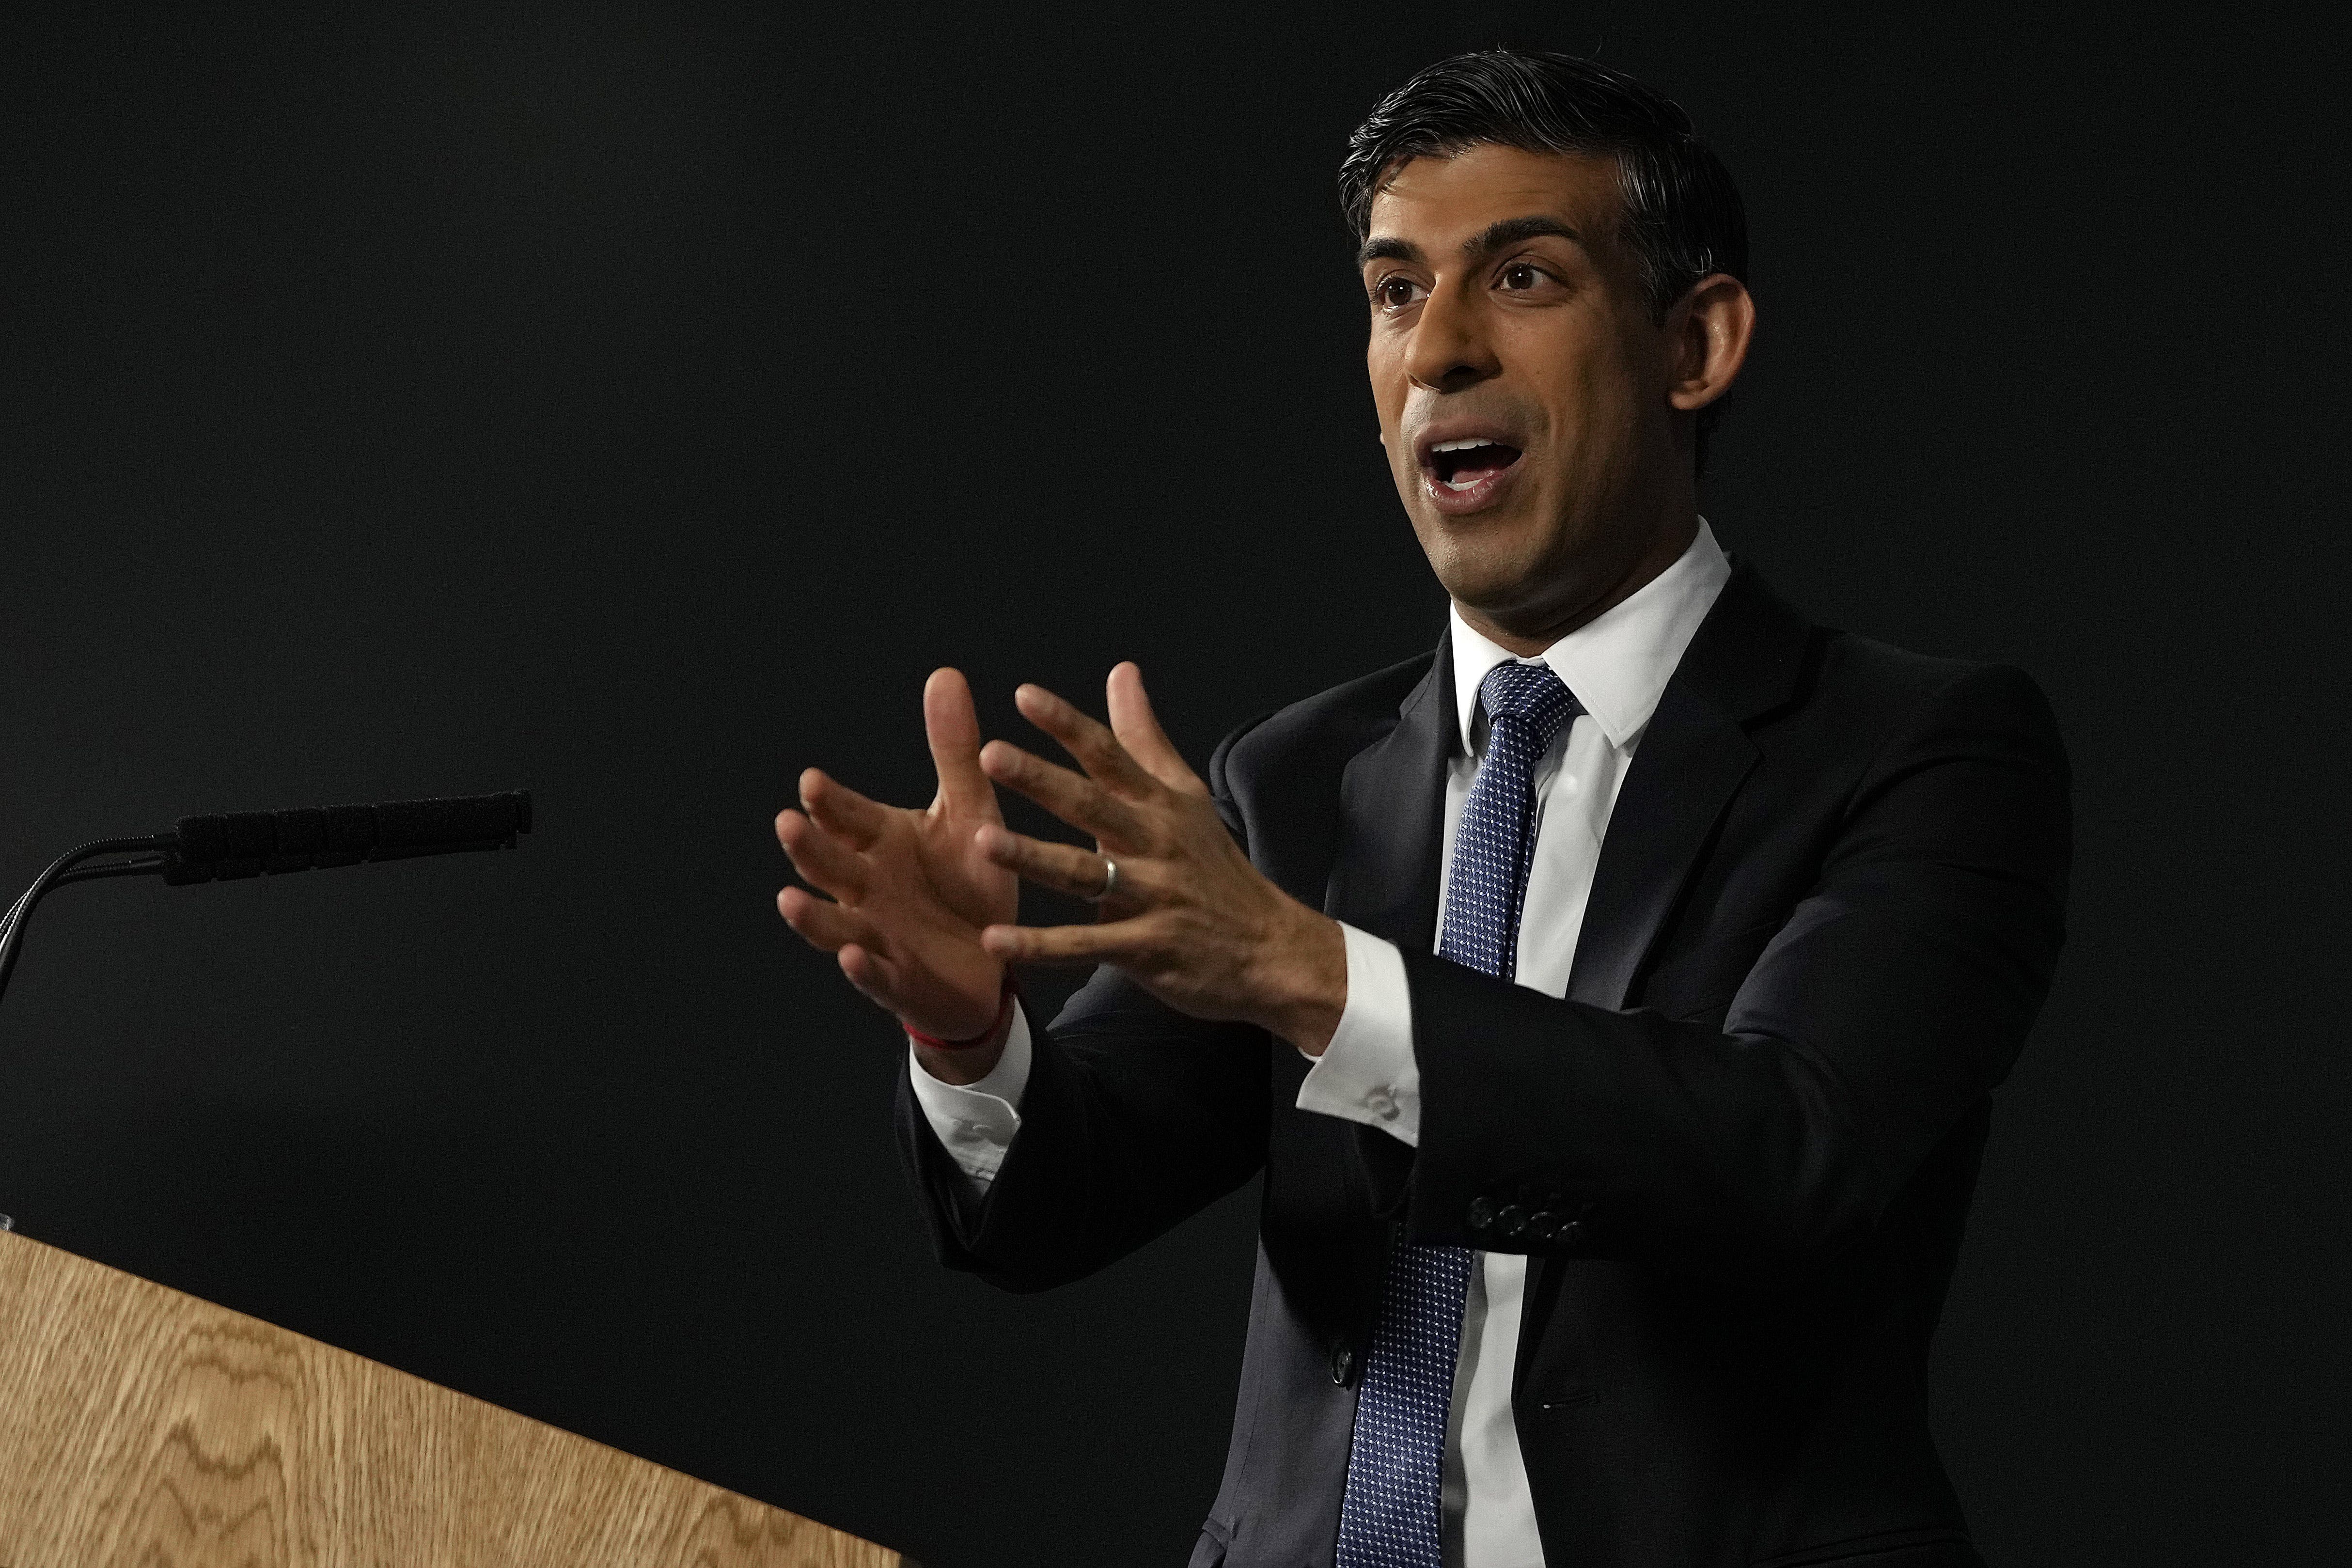 Prime Minister Rishi Sunak will take questions from industry figures and others at a business event in London on Monday (Kirsty Wigglesworth/PA)